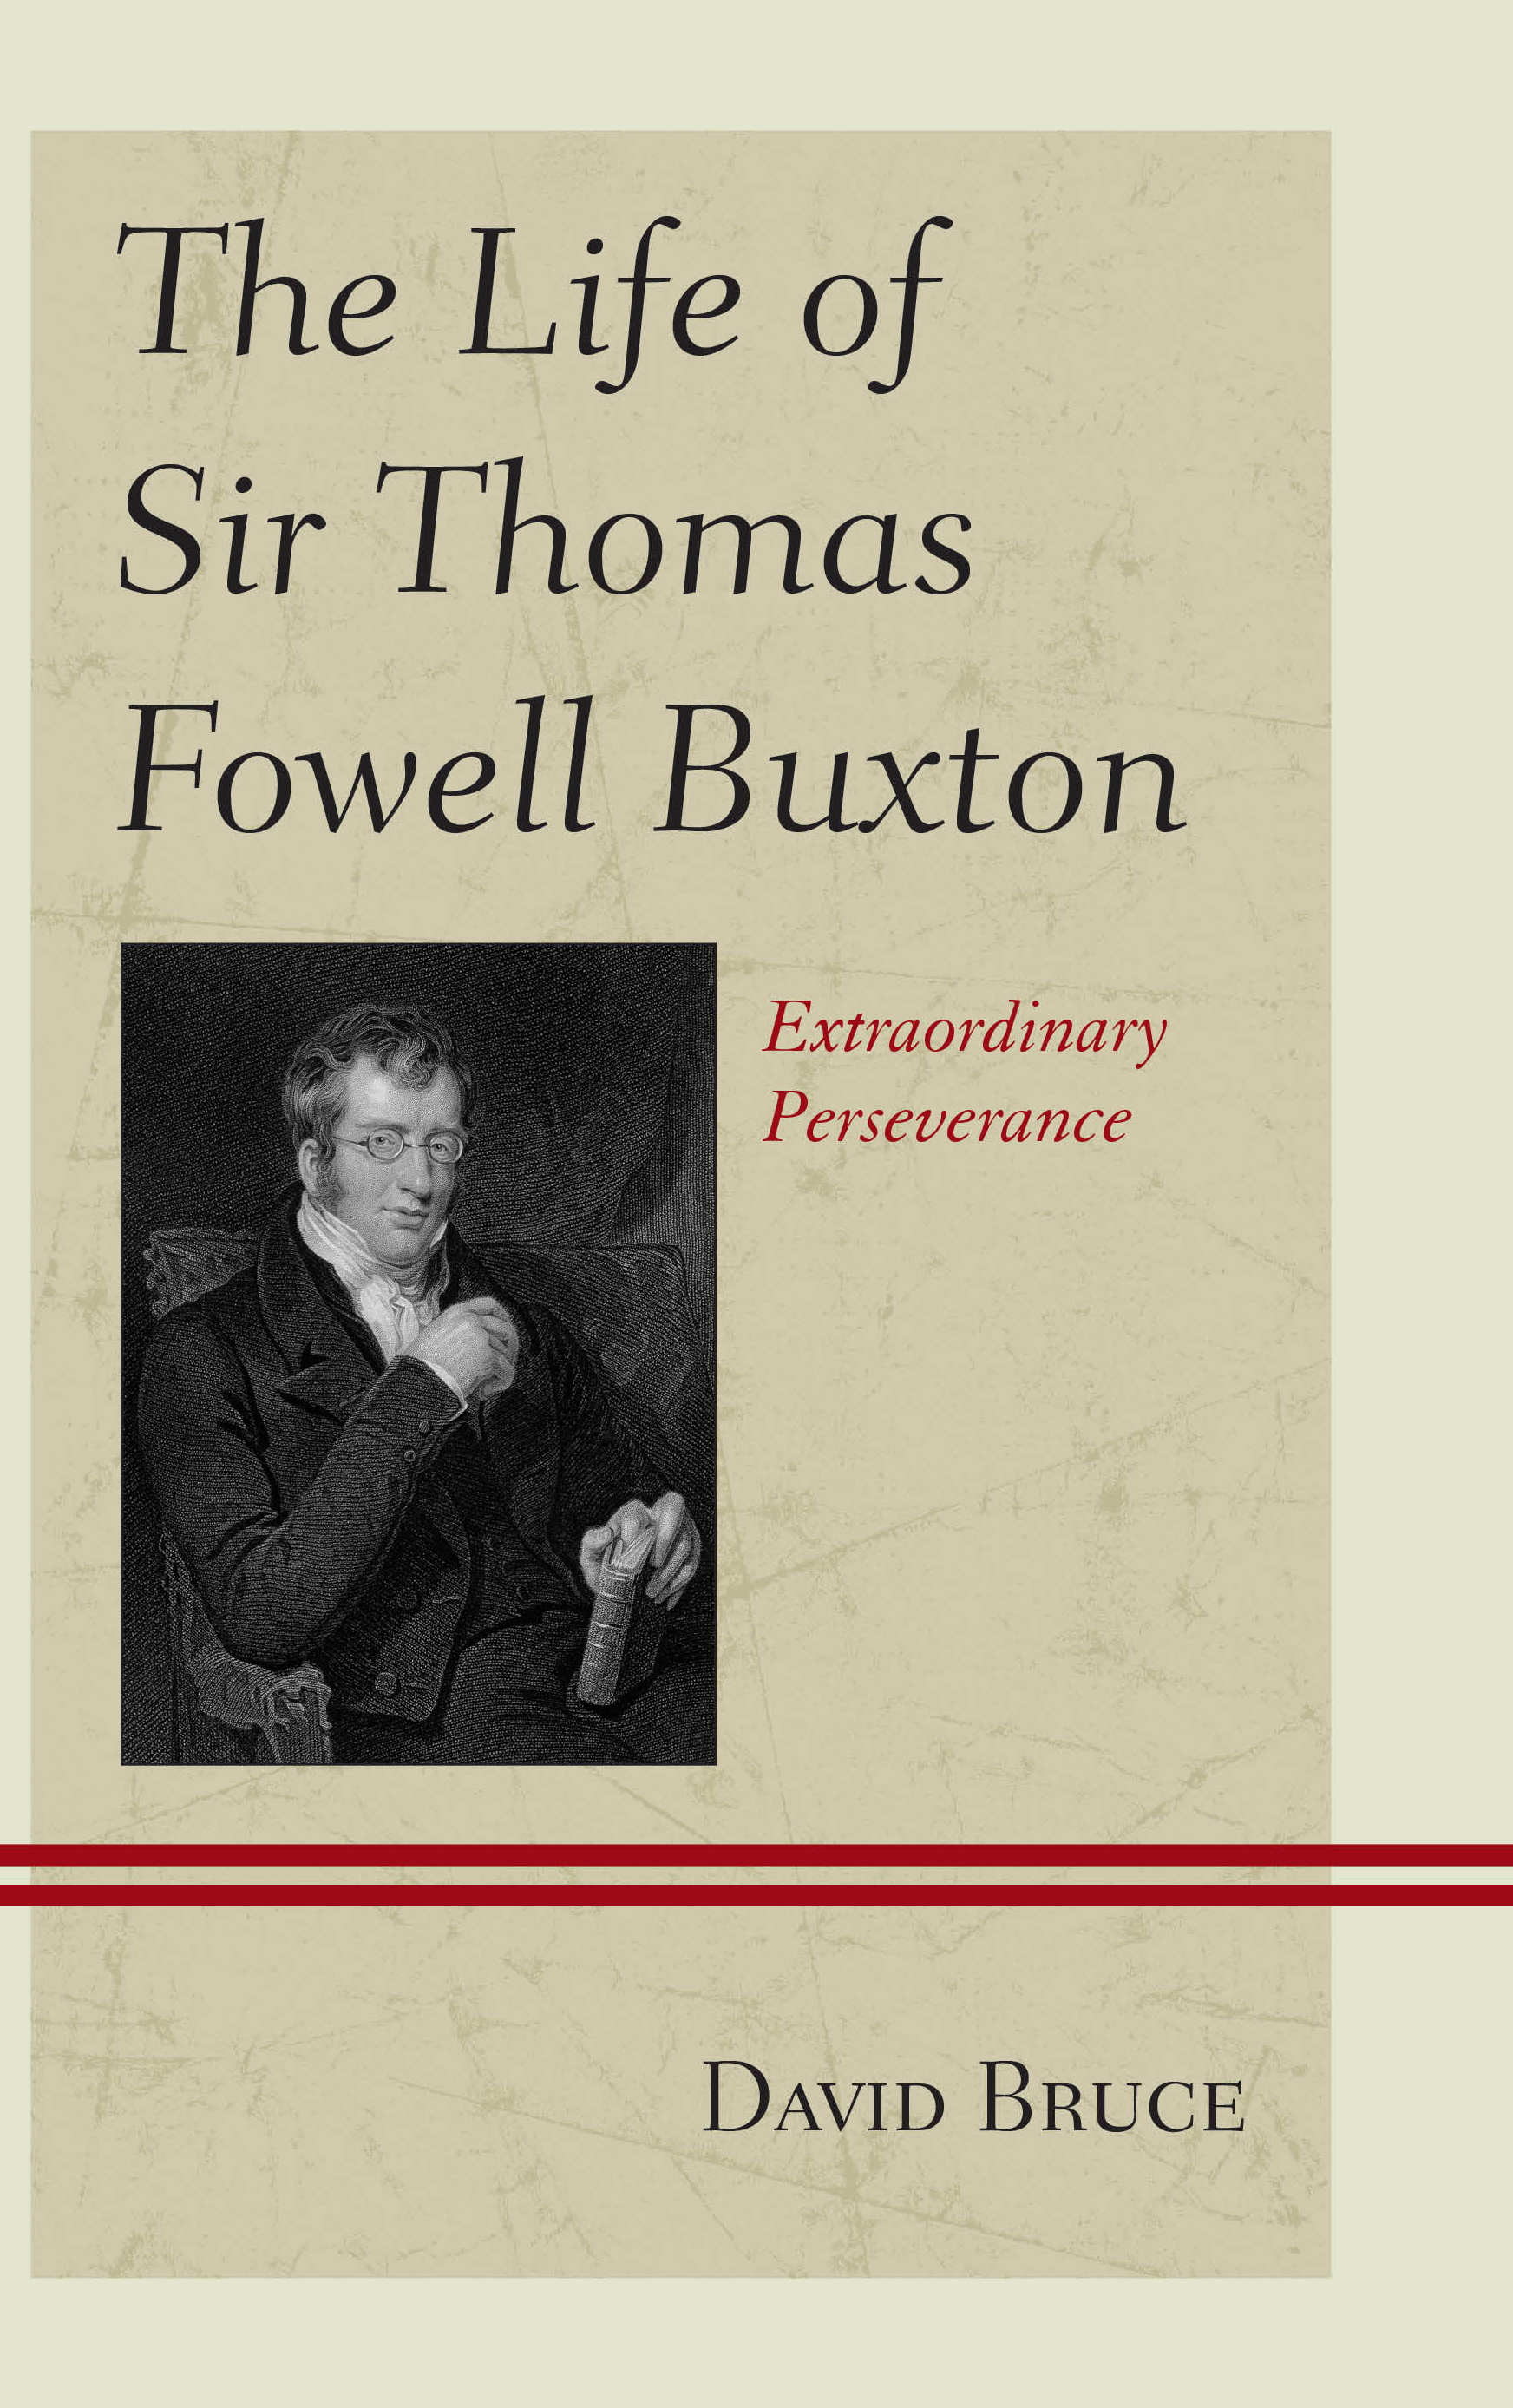 The Life of Sir Thomas Fowell Buxton: Extraordinary Perseverance